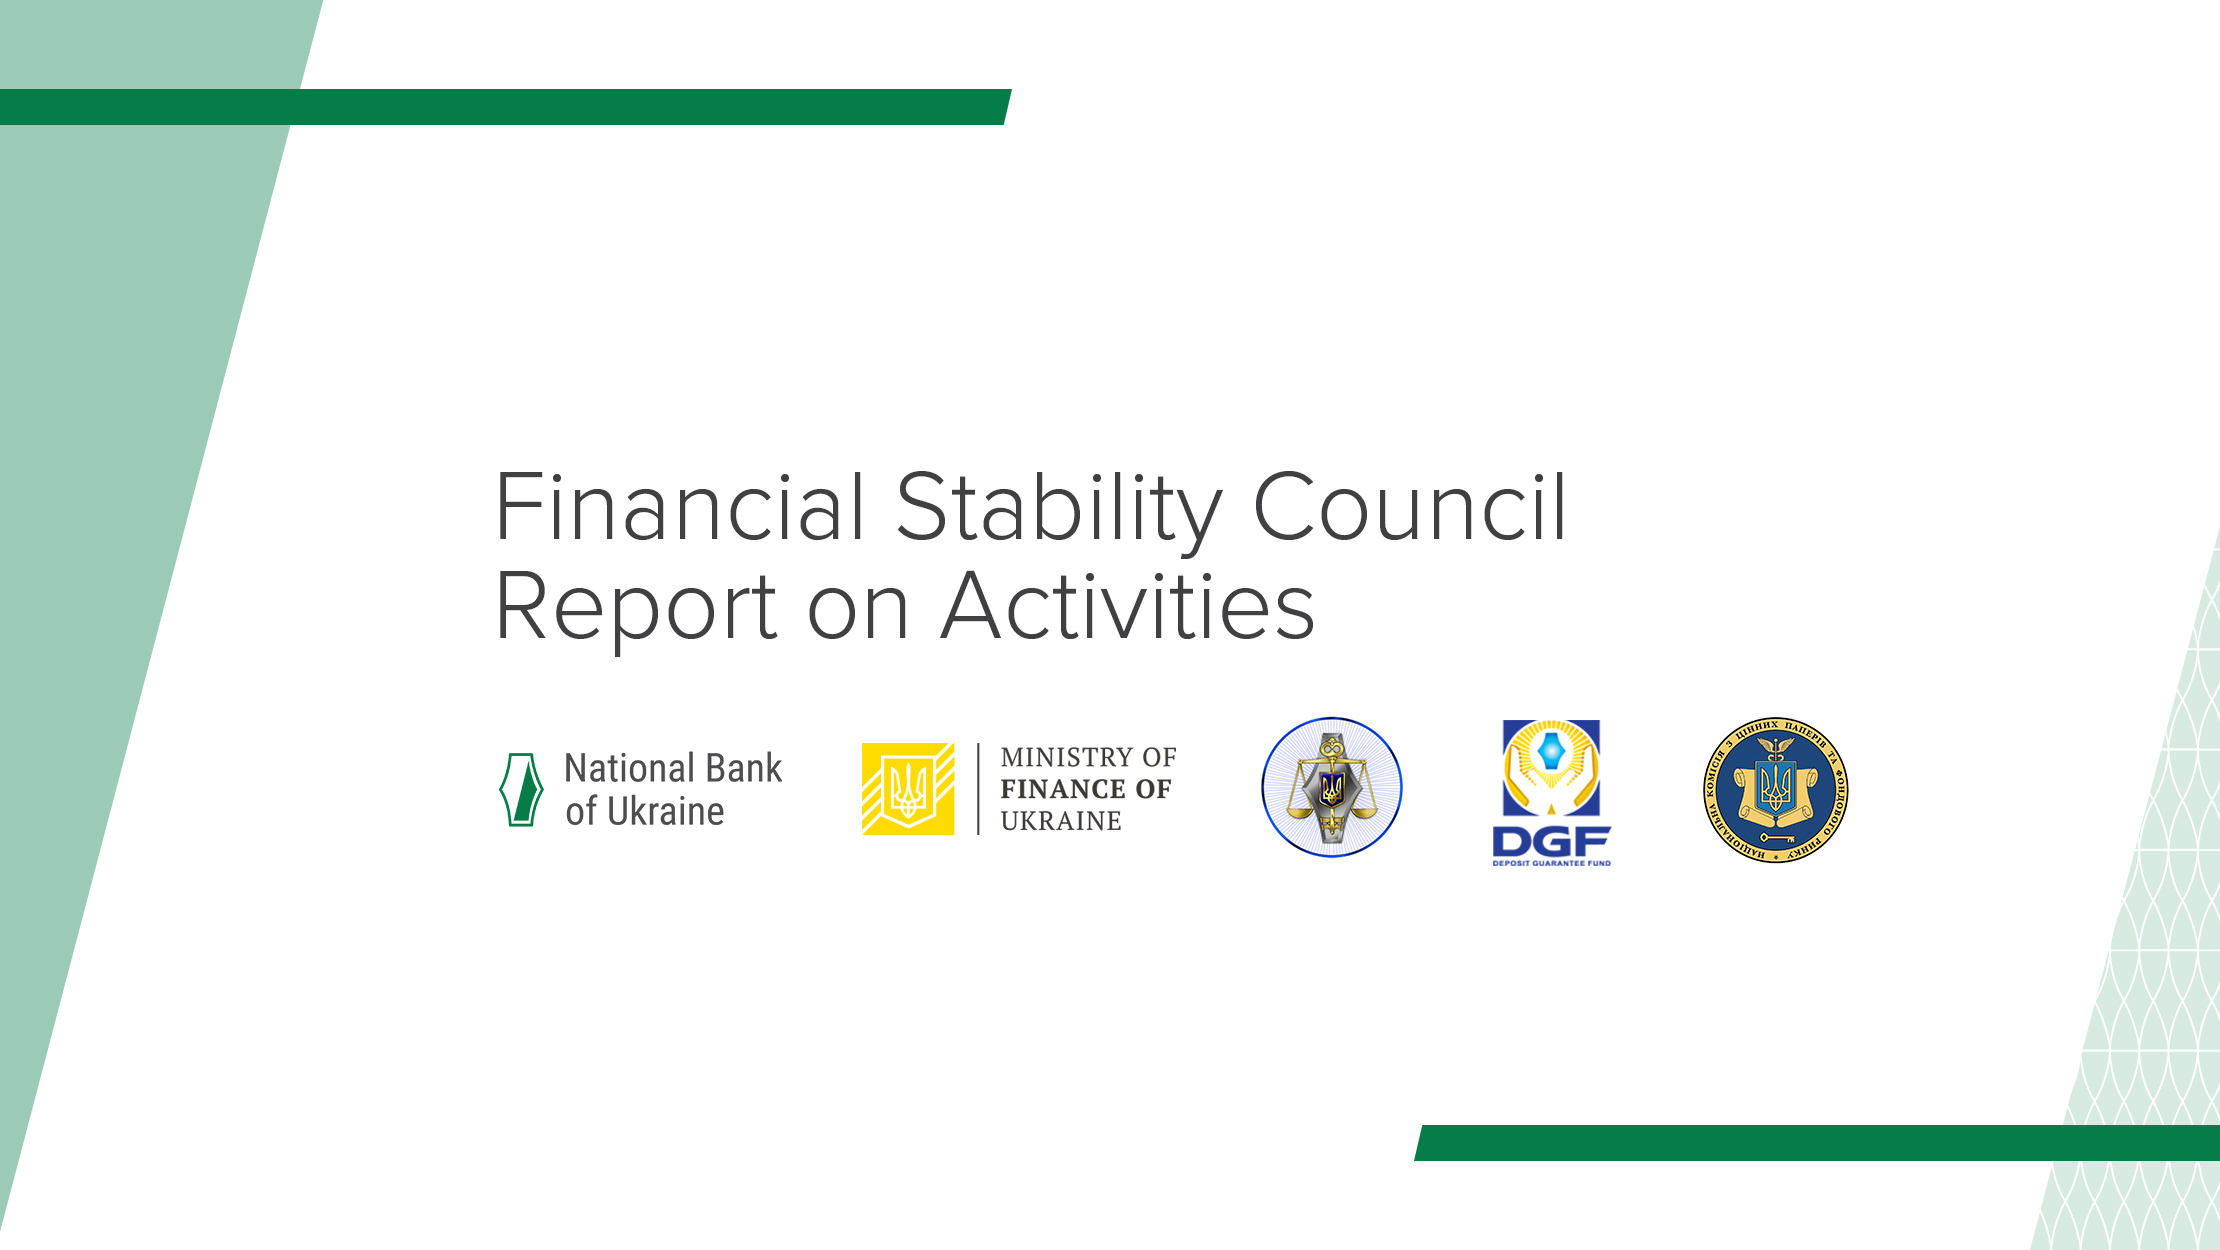 Financial Stability Council Report on Activities (August 2020 – July 2021)